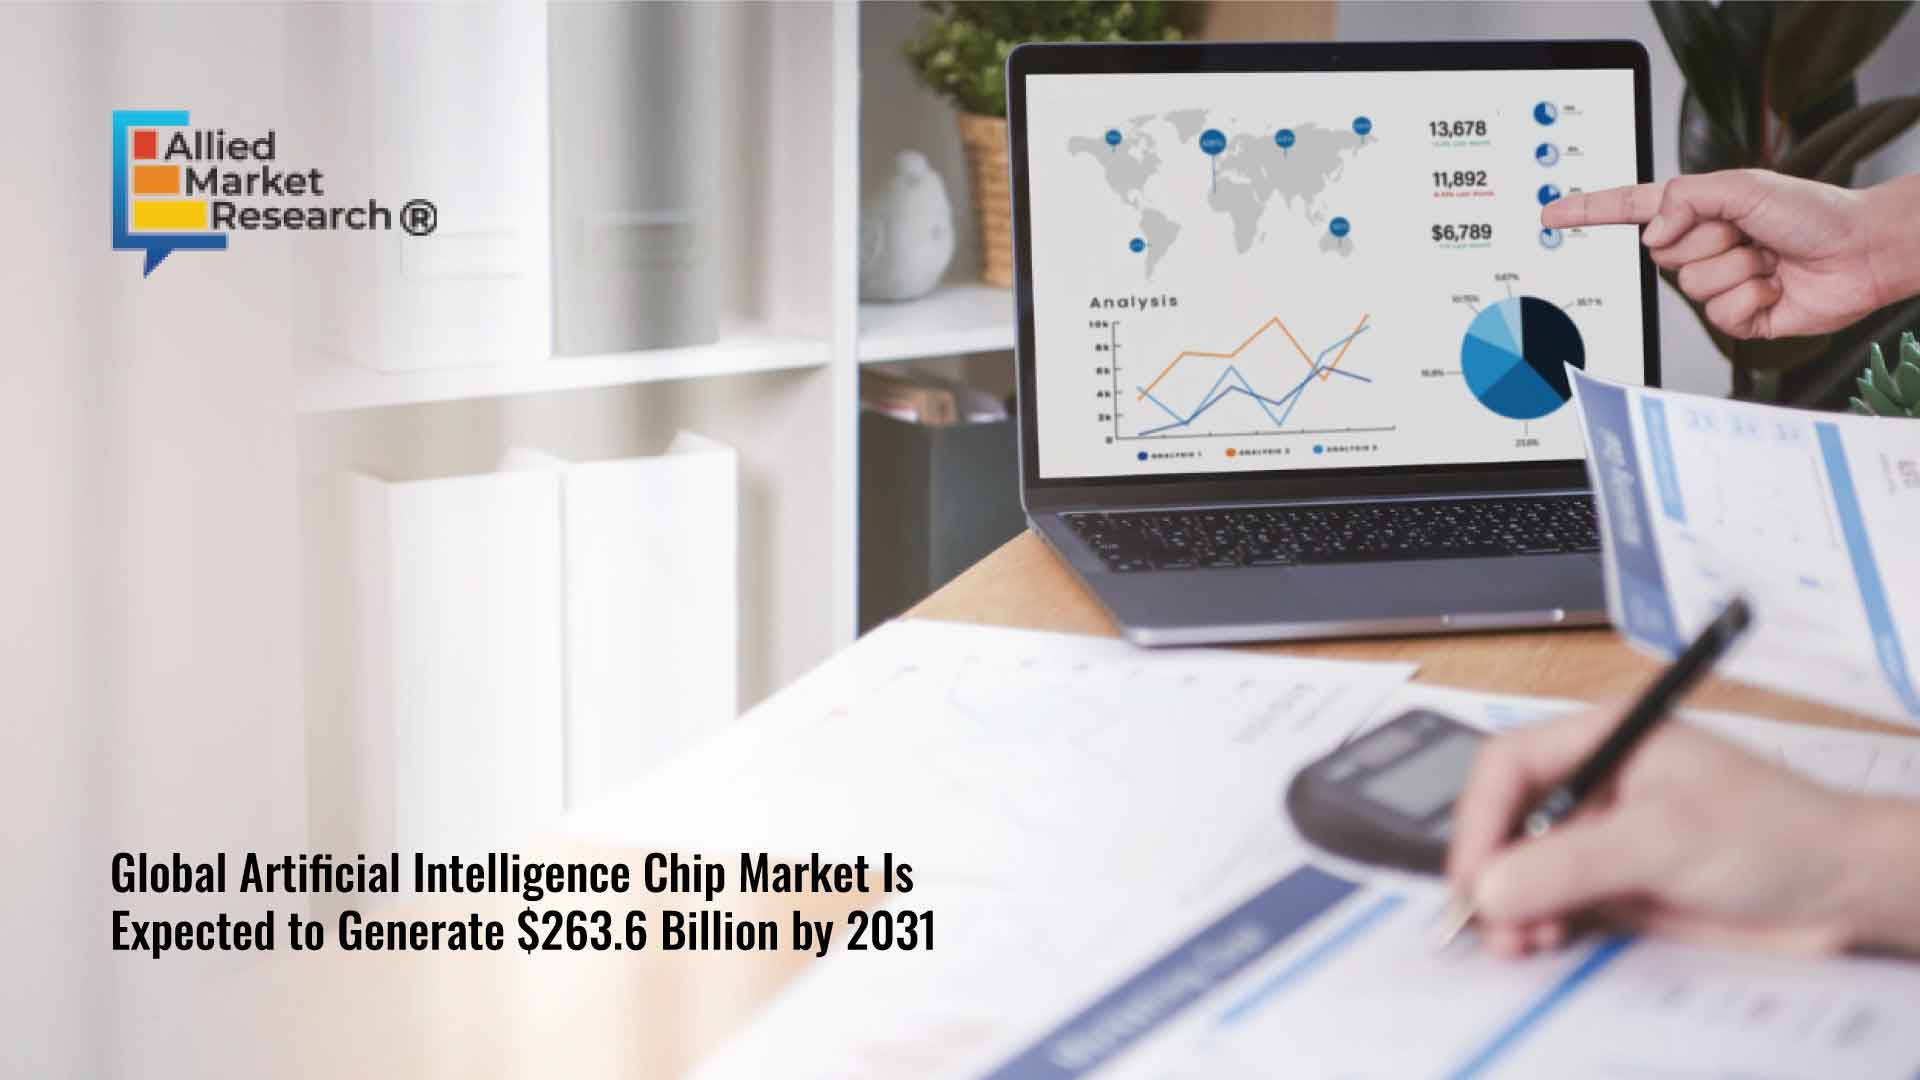 Global Artificial Intelligence Chip Market Is Expected to Generate $263.6 Billion by 2031: Allied Market Research